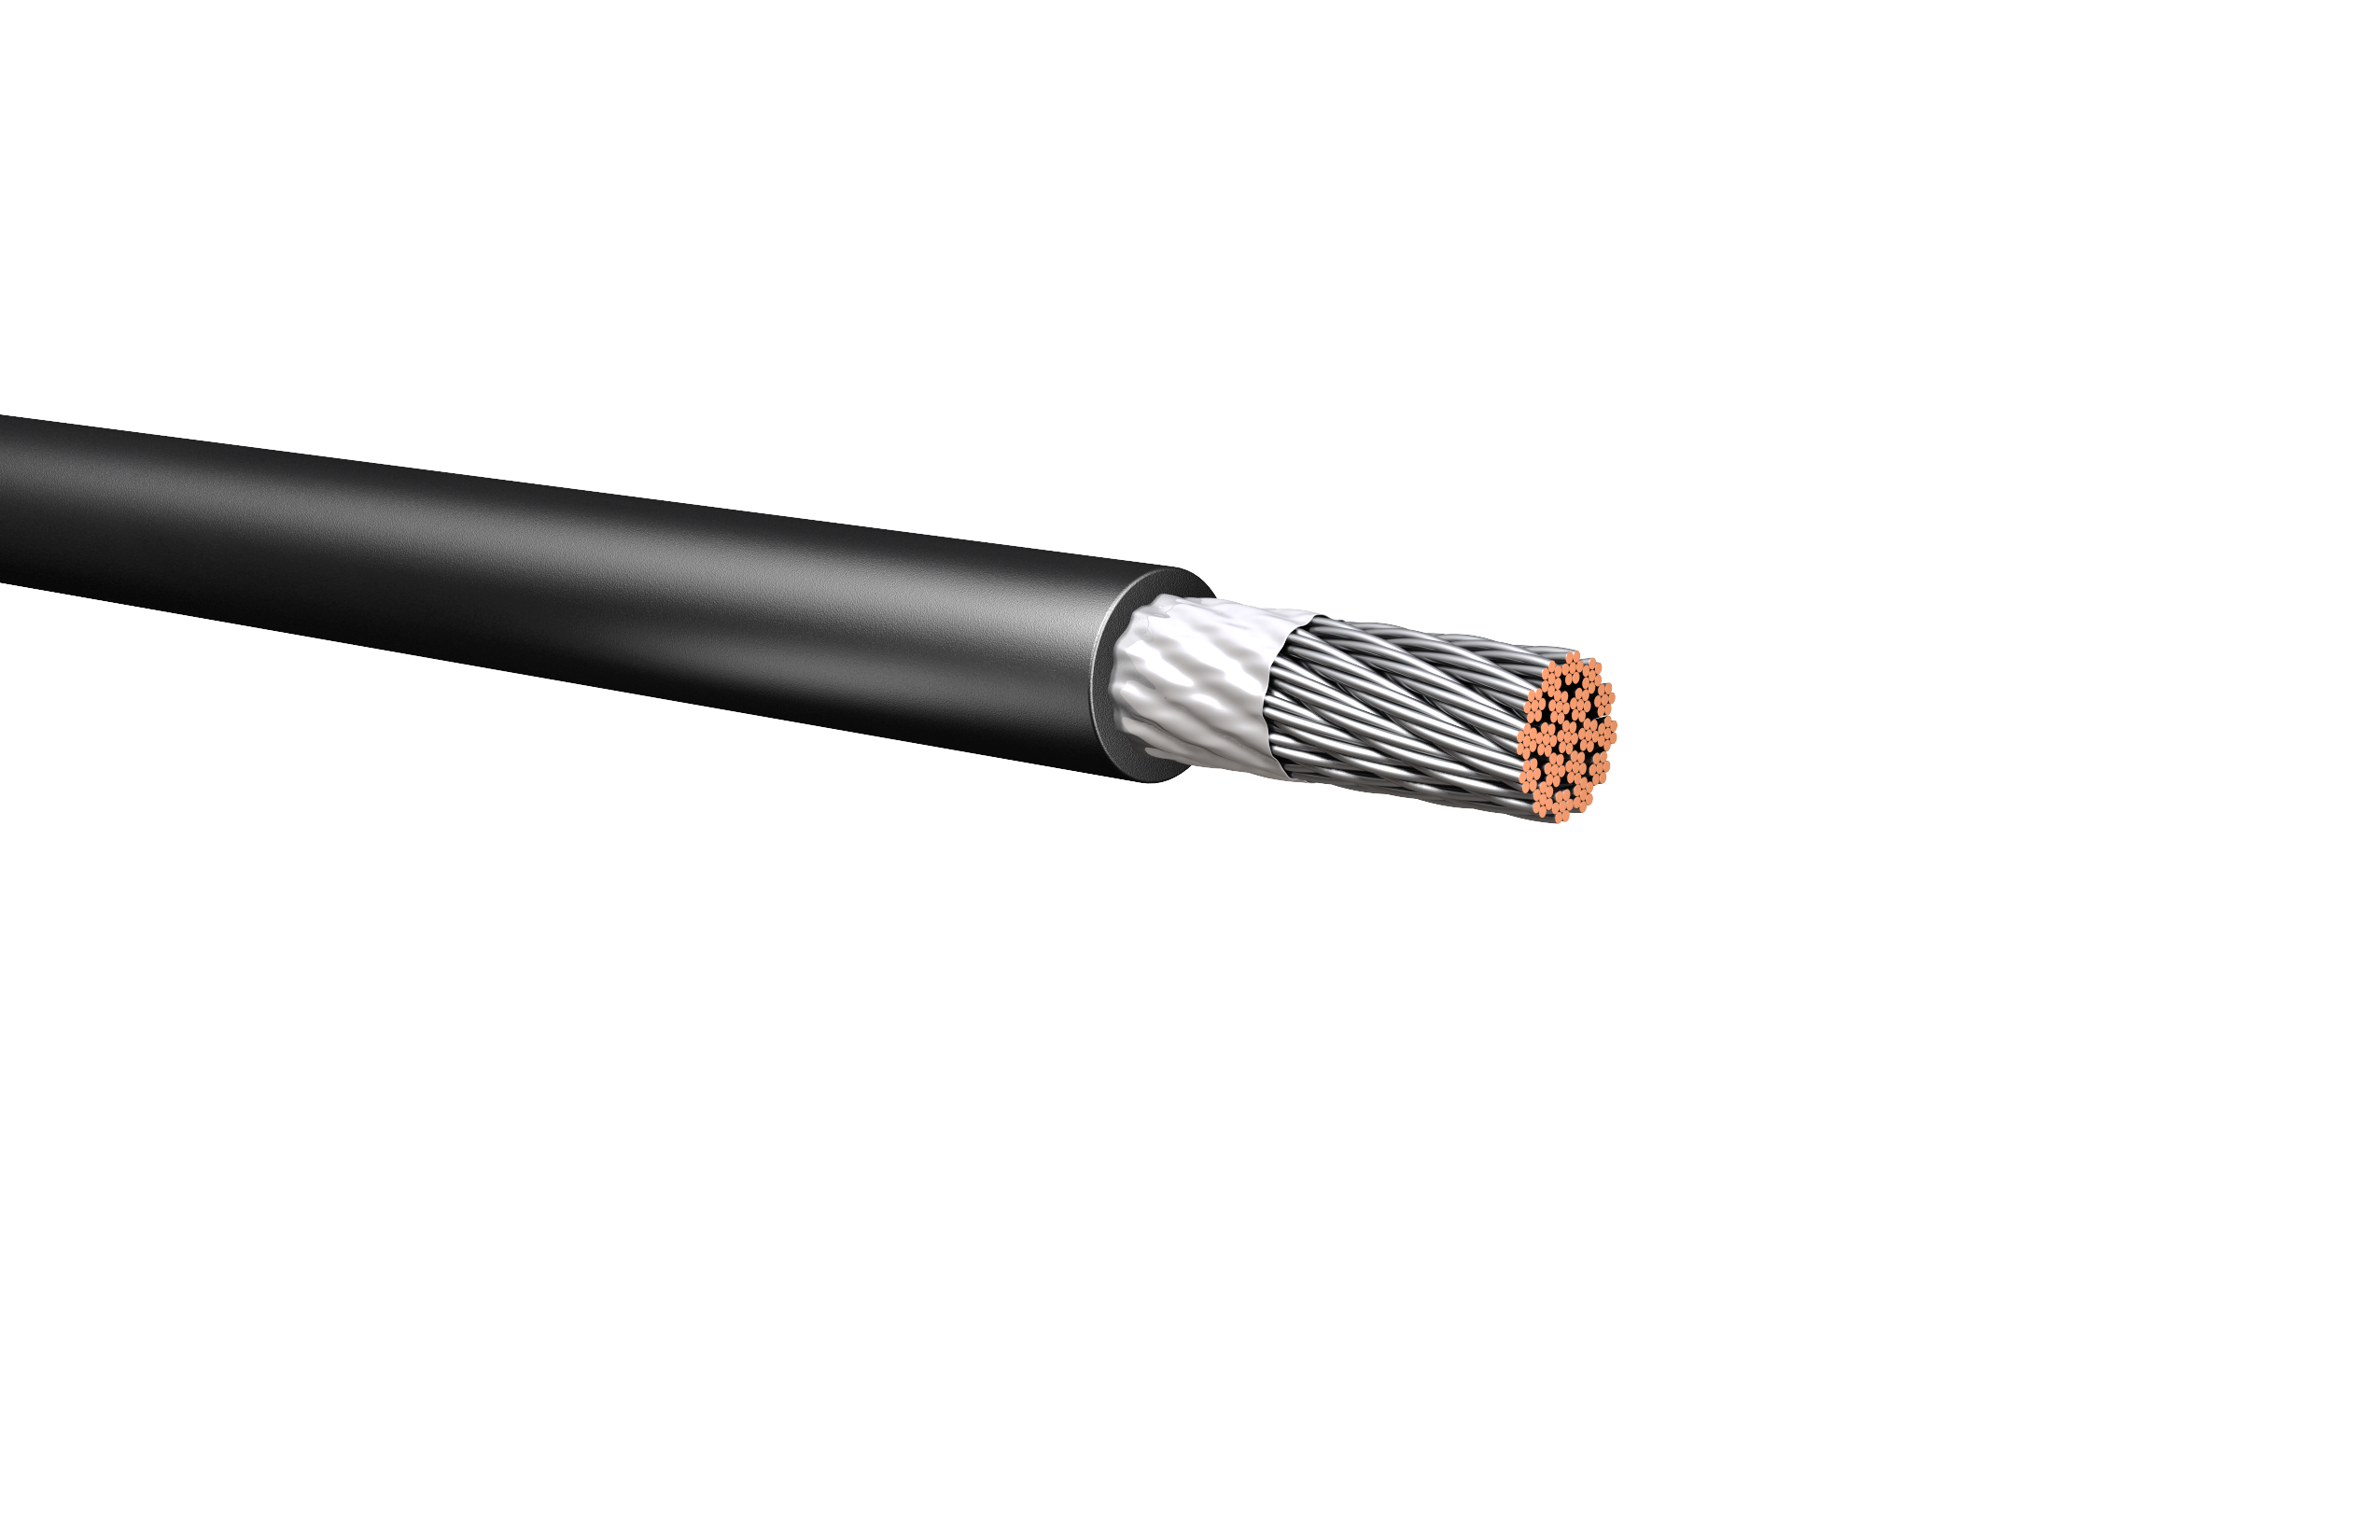 HW260: 600V Single Conductor Power Cable, Unarmored